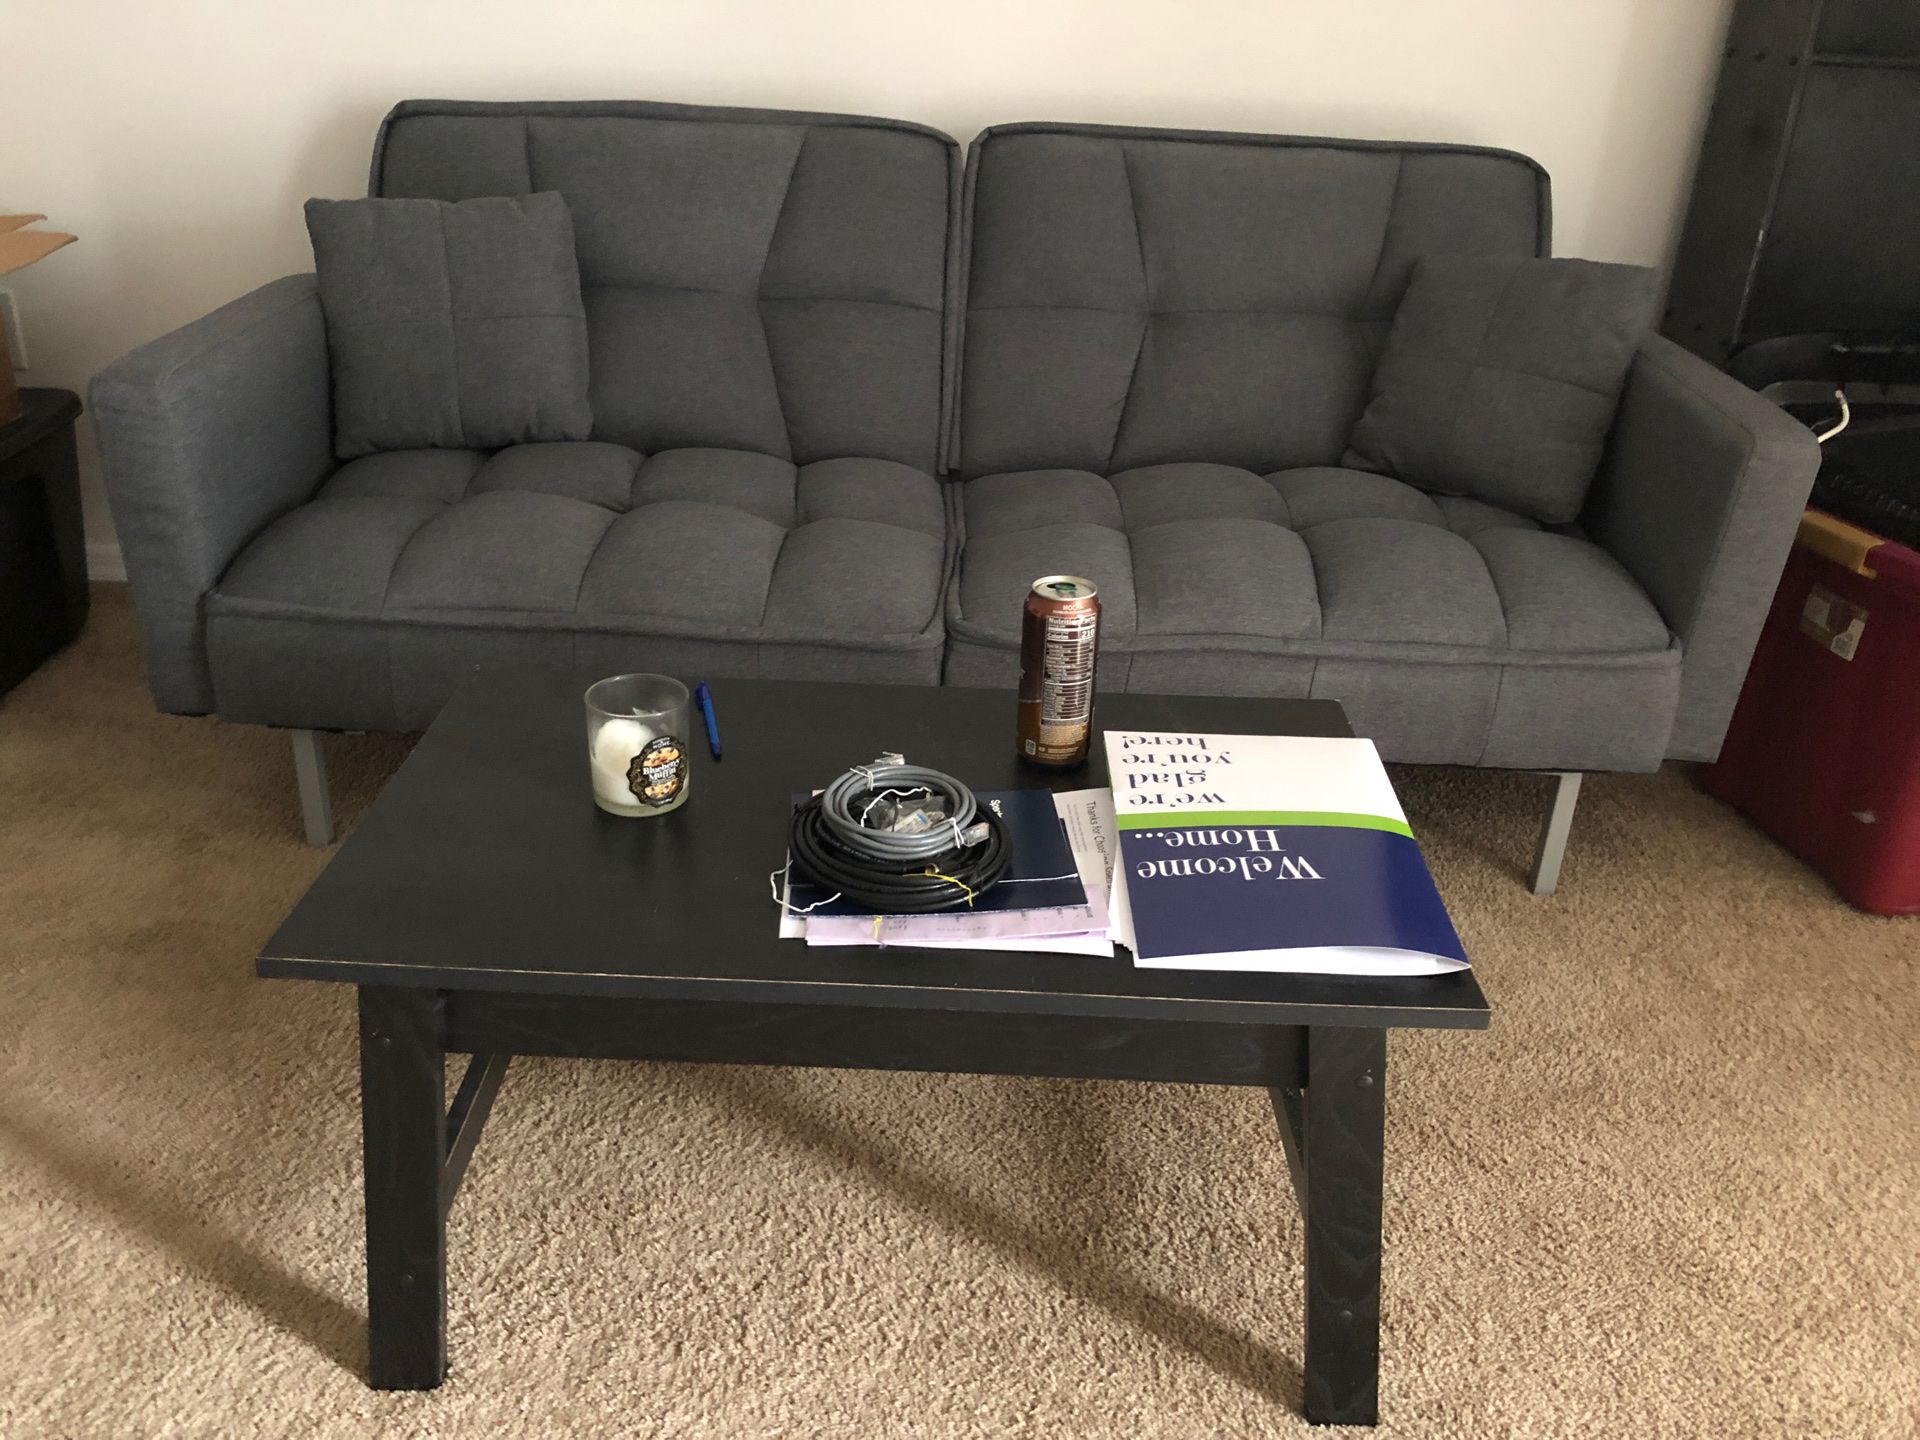 Bestchoice futon couch like new